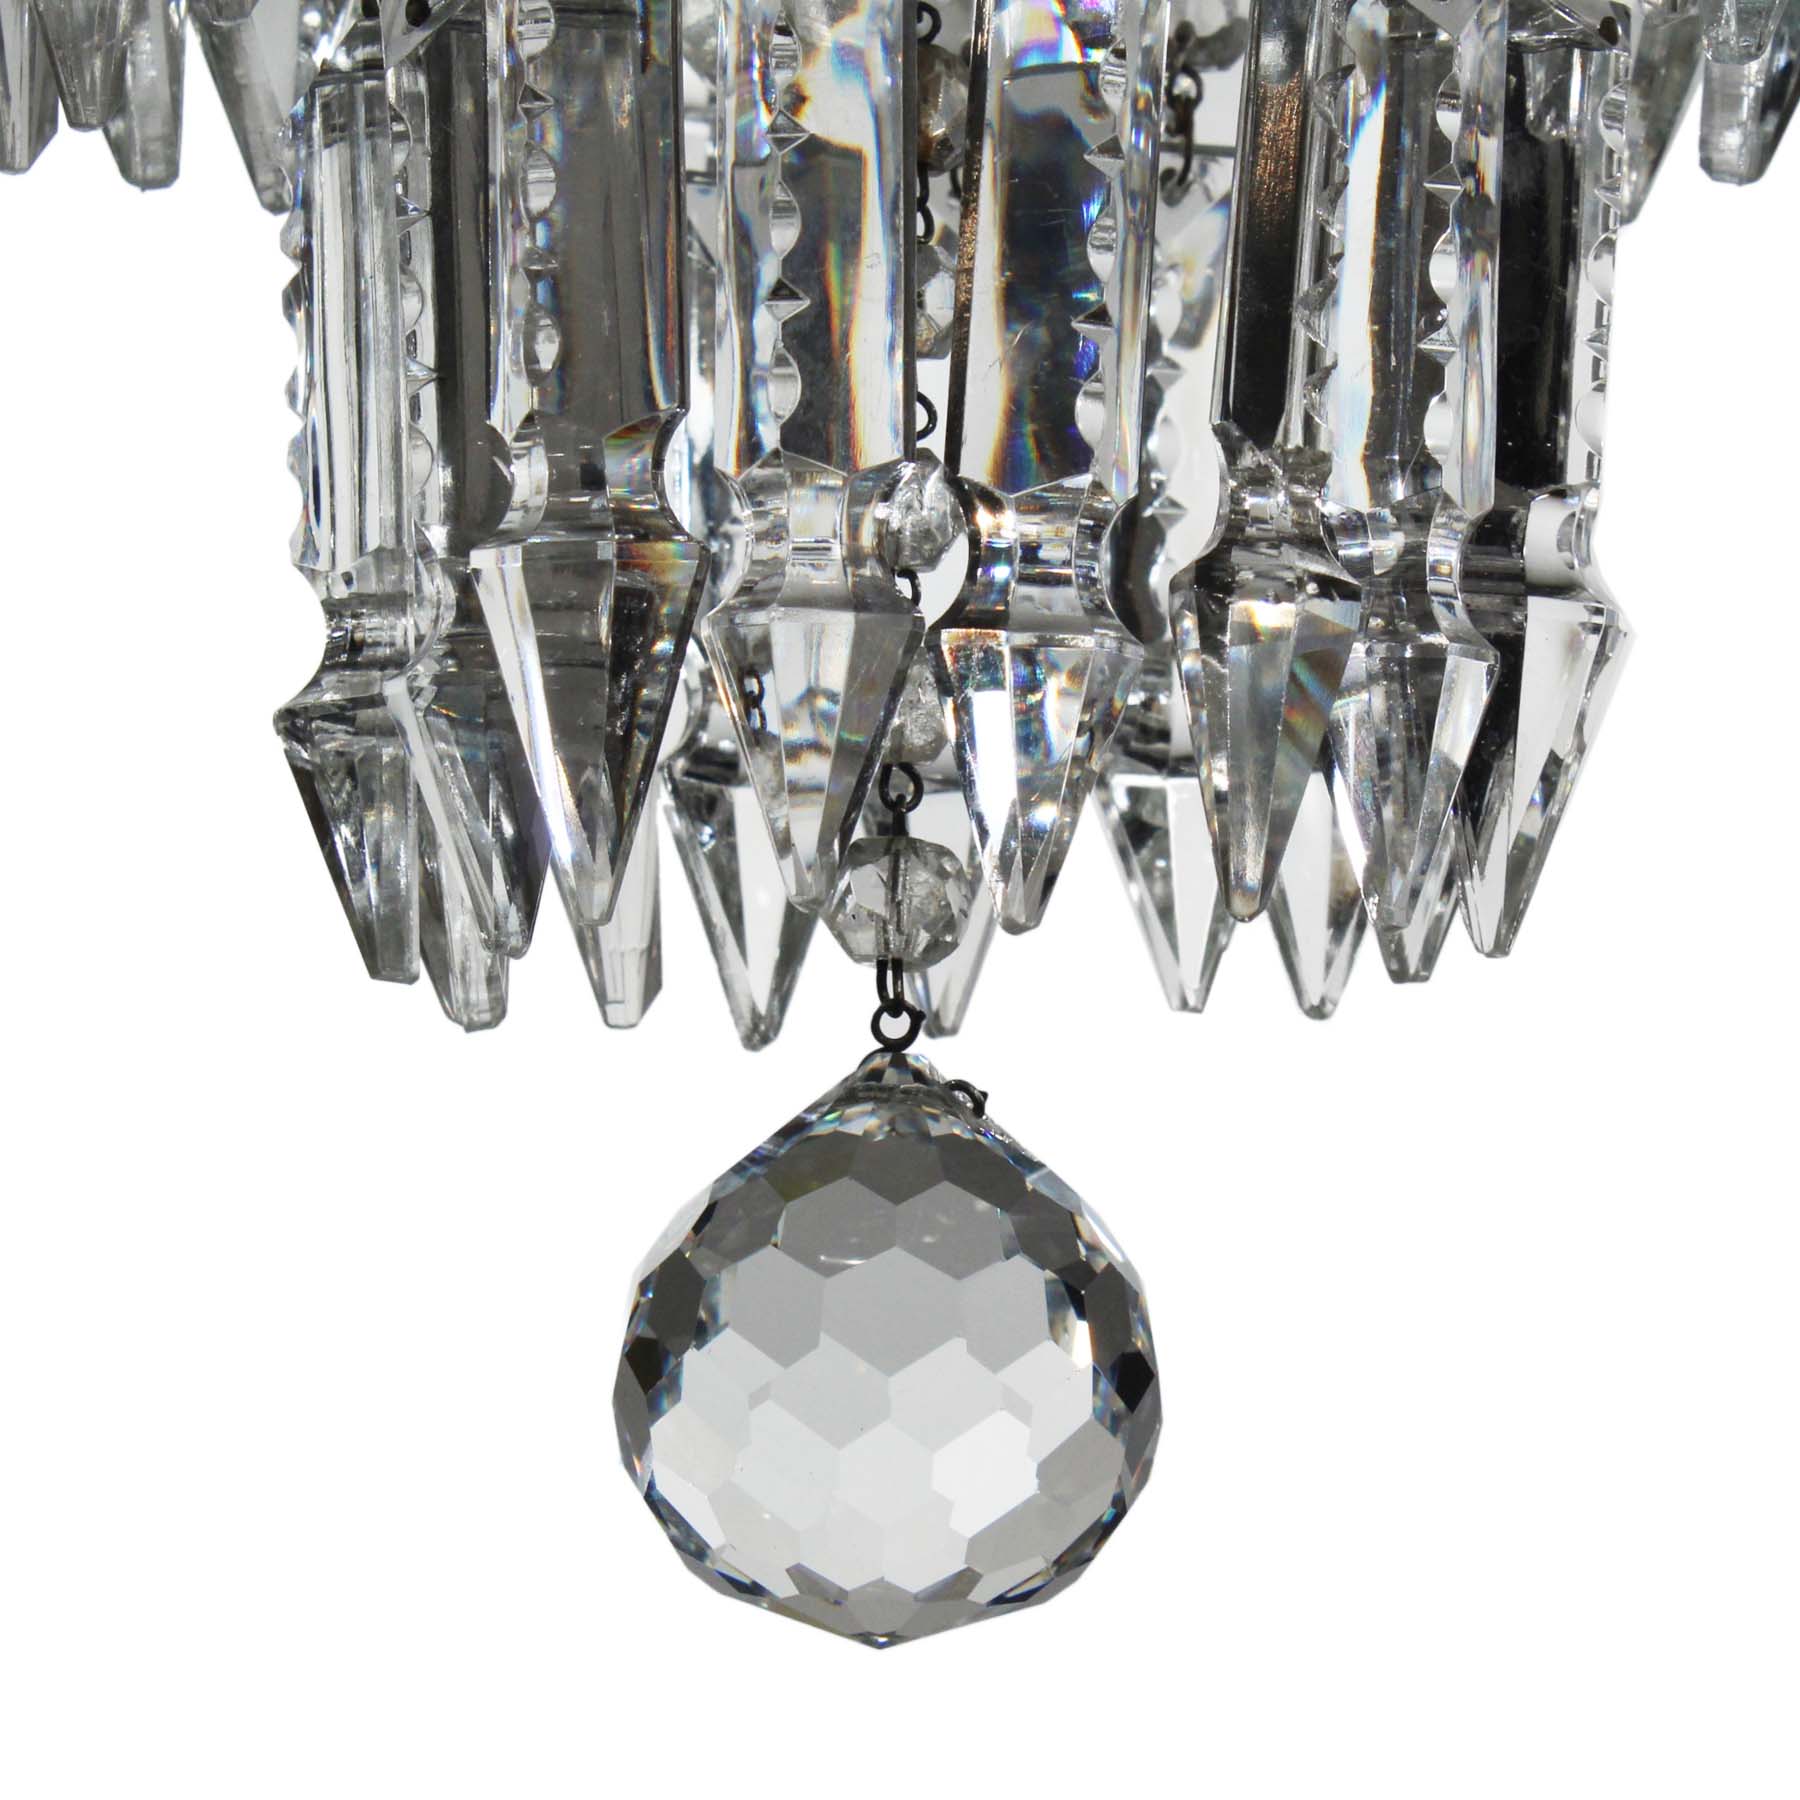 SOLD Antique Neoclassical Wedding Cake Chandelier with Mica-69902